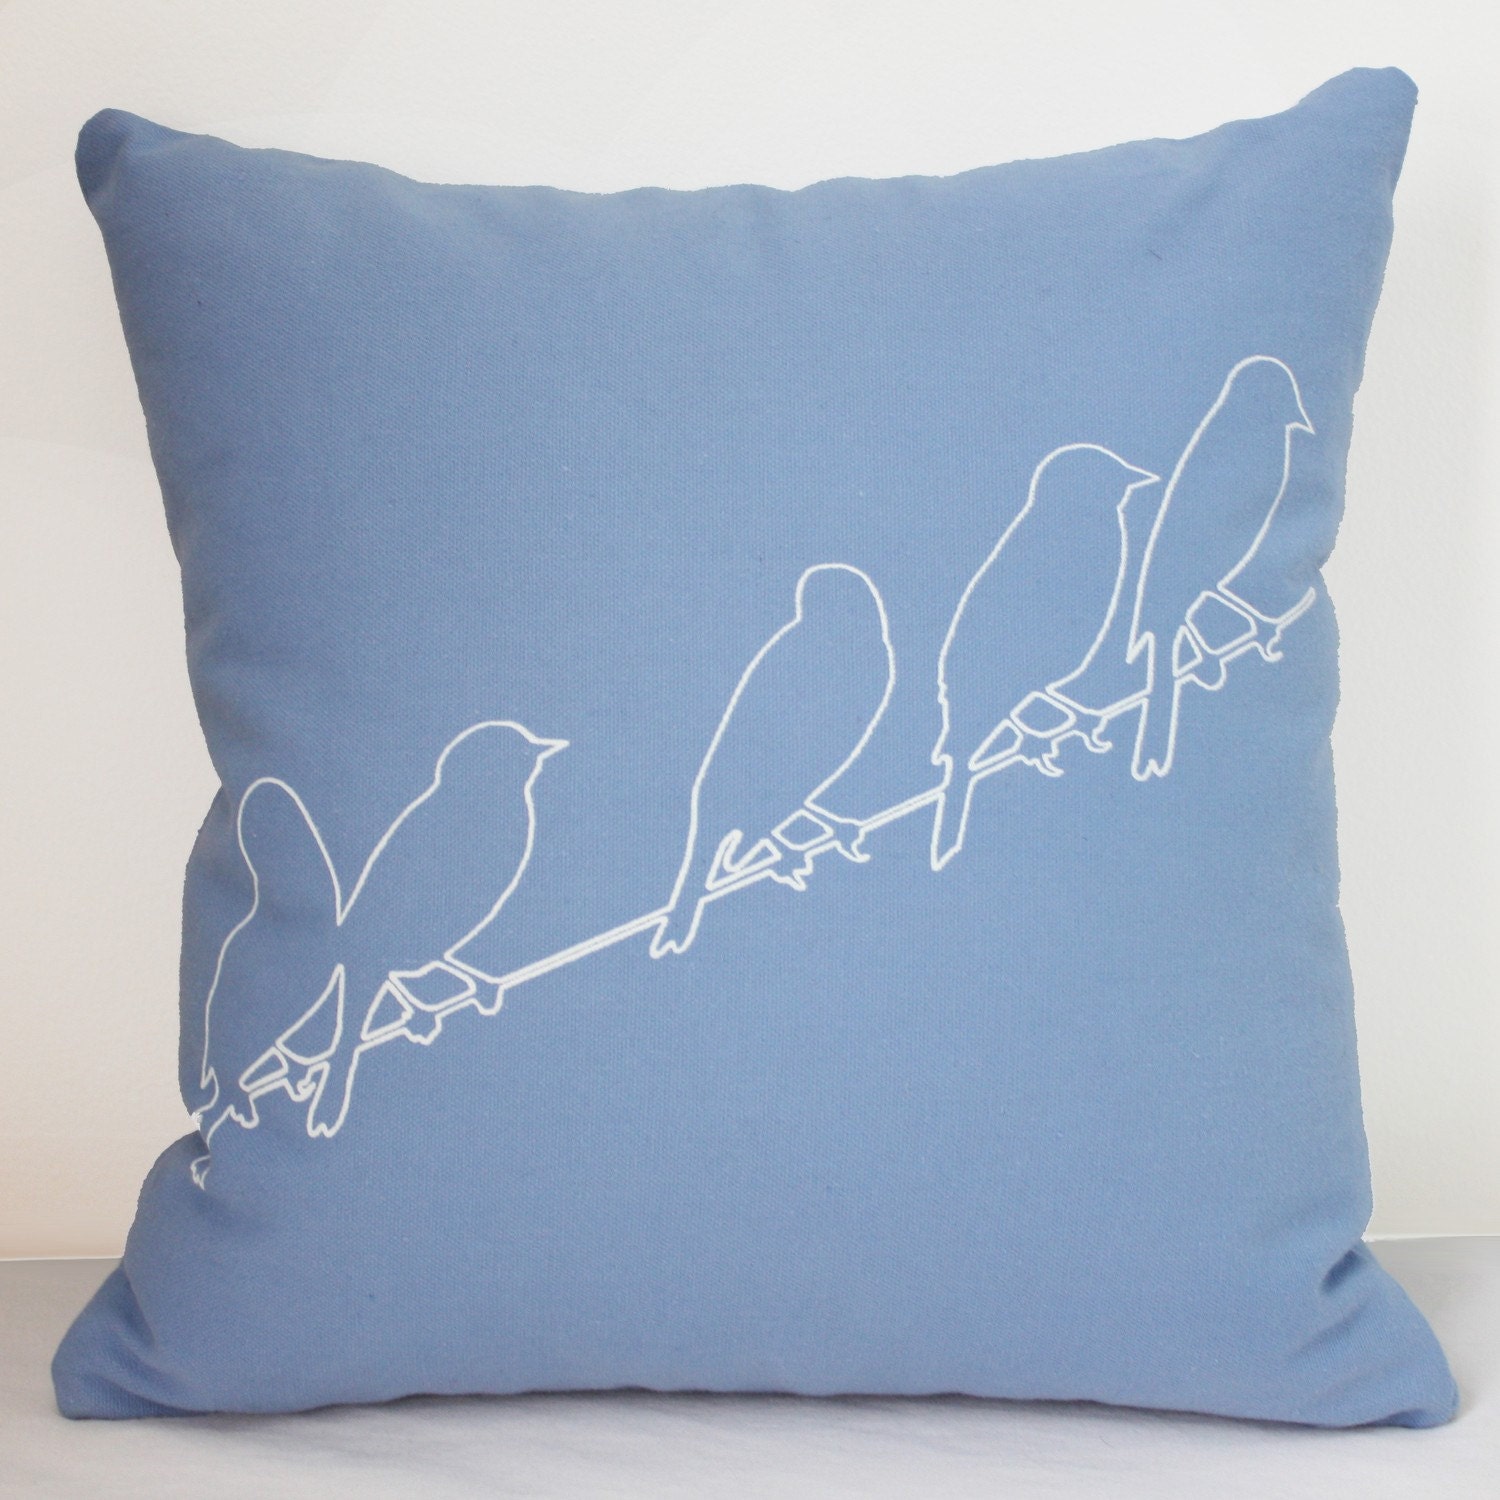 16 in. Square Throw Pillow - Dusty Blue with Birds on Wire print - wickedmint